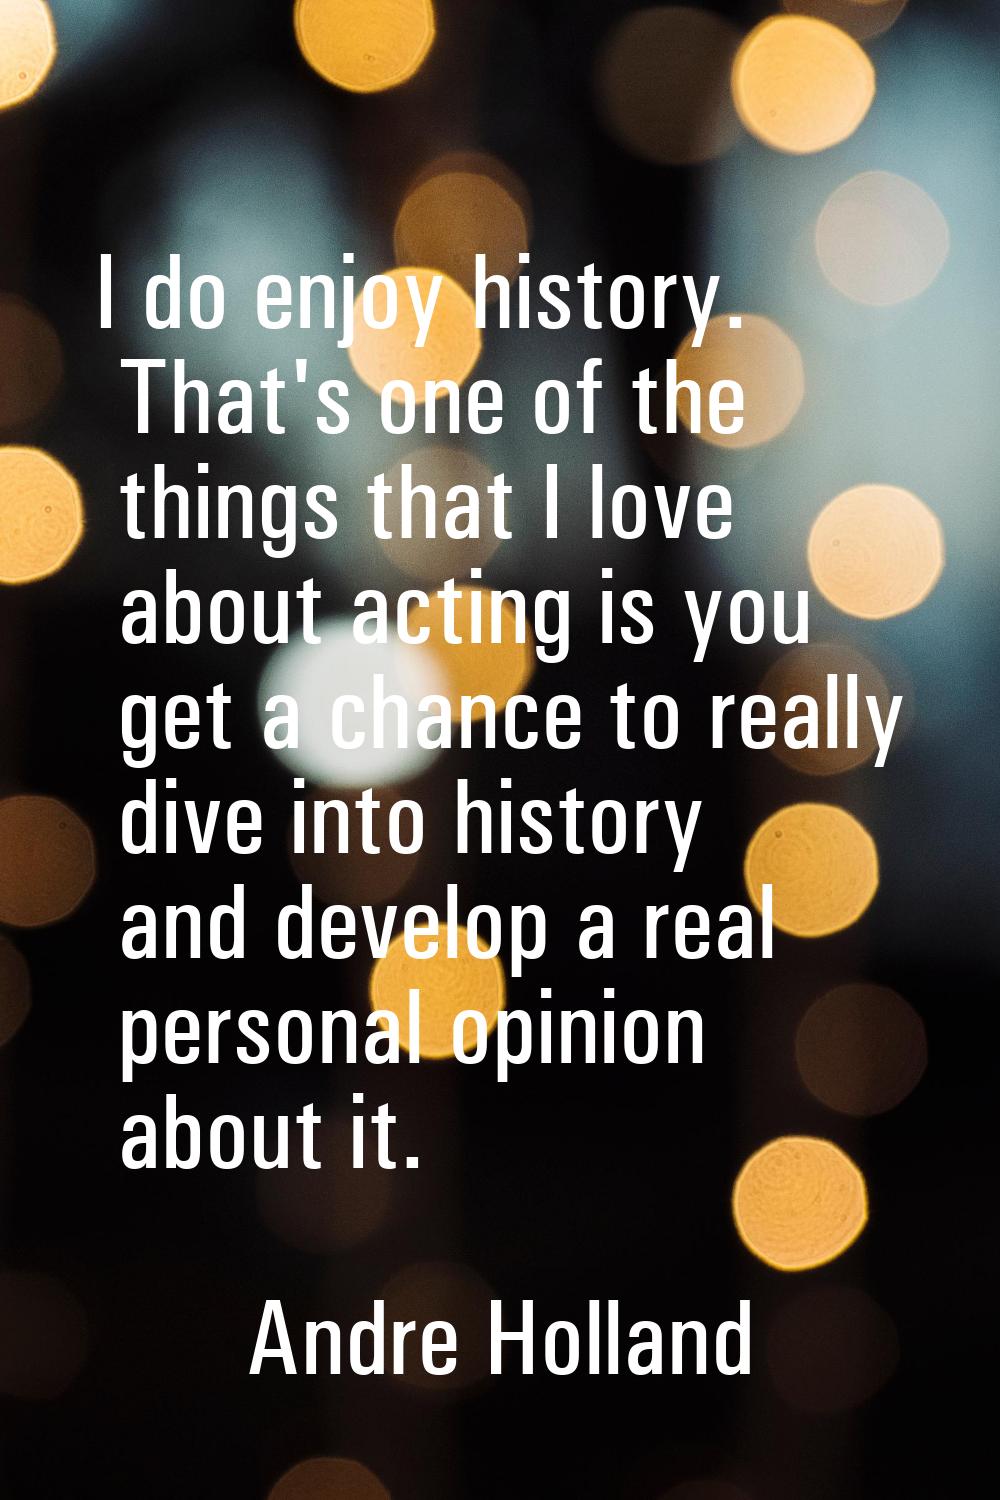 I do enjoy history. That's one of the things that I love about acting is you get a chance to really